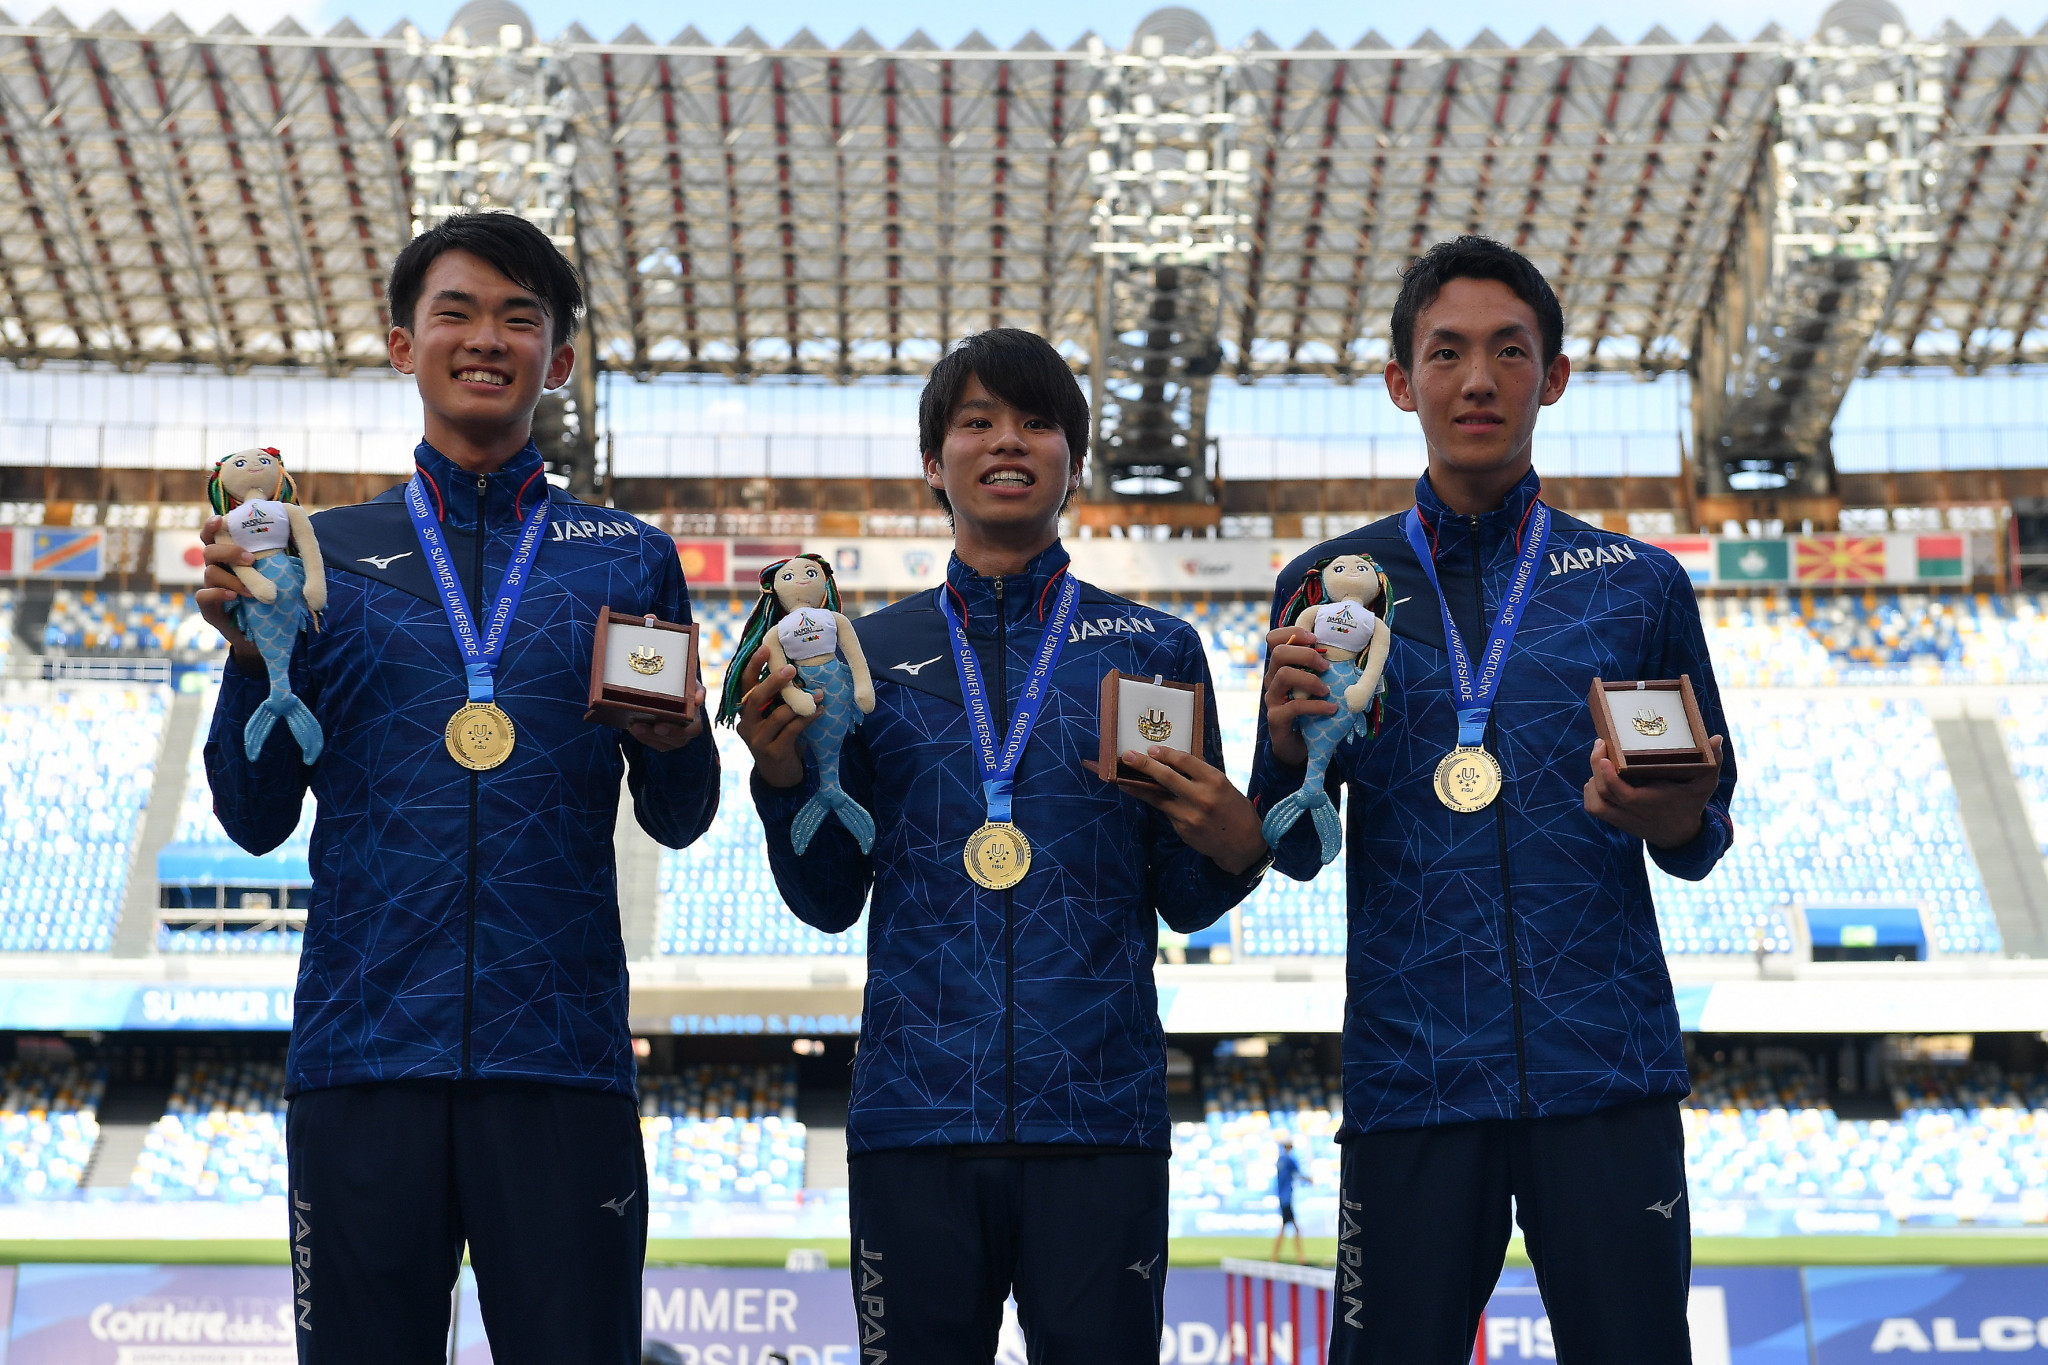 Japan secured a one-two-three finish in the men's 20km walk en route to the men's team Universiade title ©Naples 2019